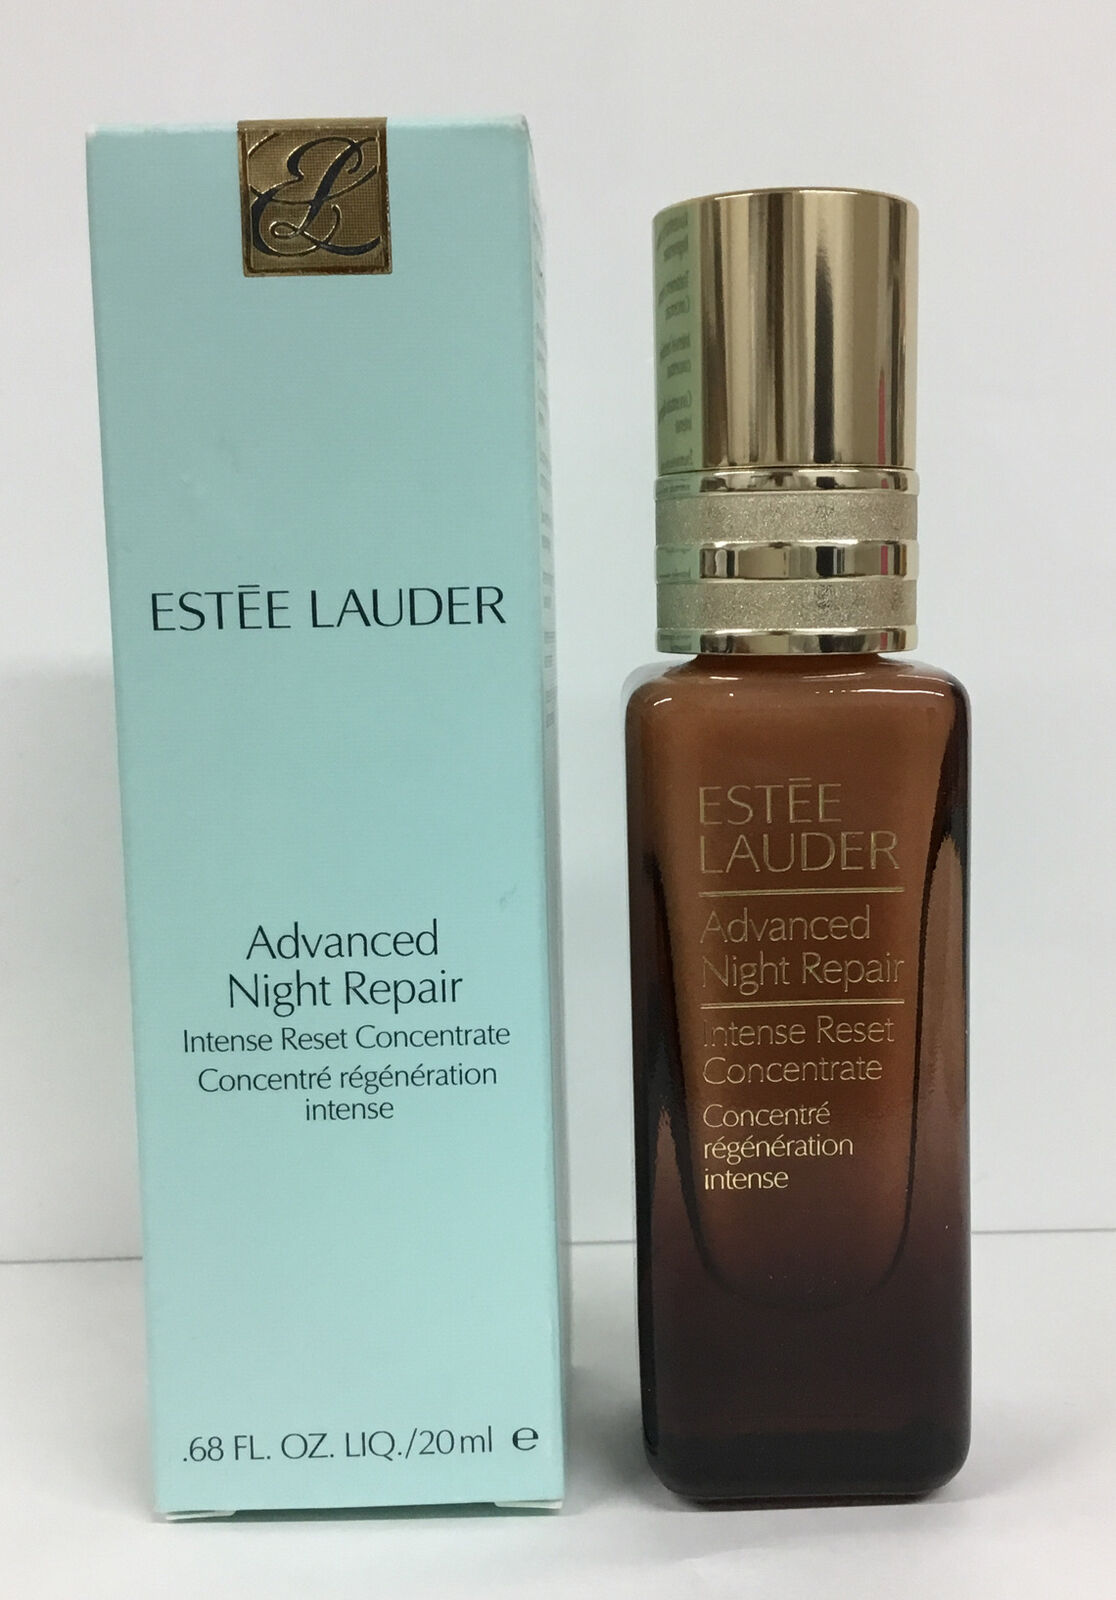 Estee Lauder Advanced Night Repair Intense Concentrate 0.68oz As Pictured